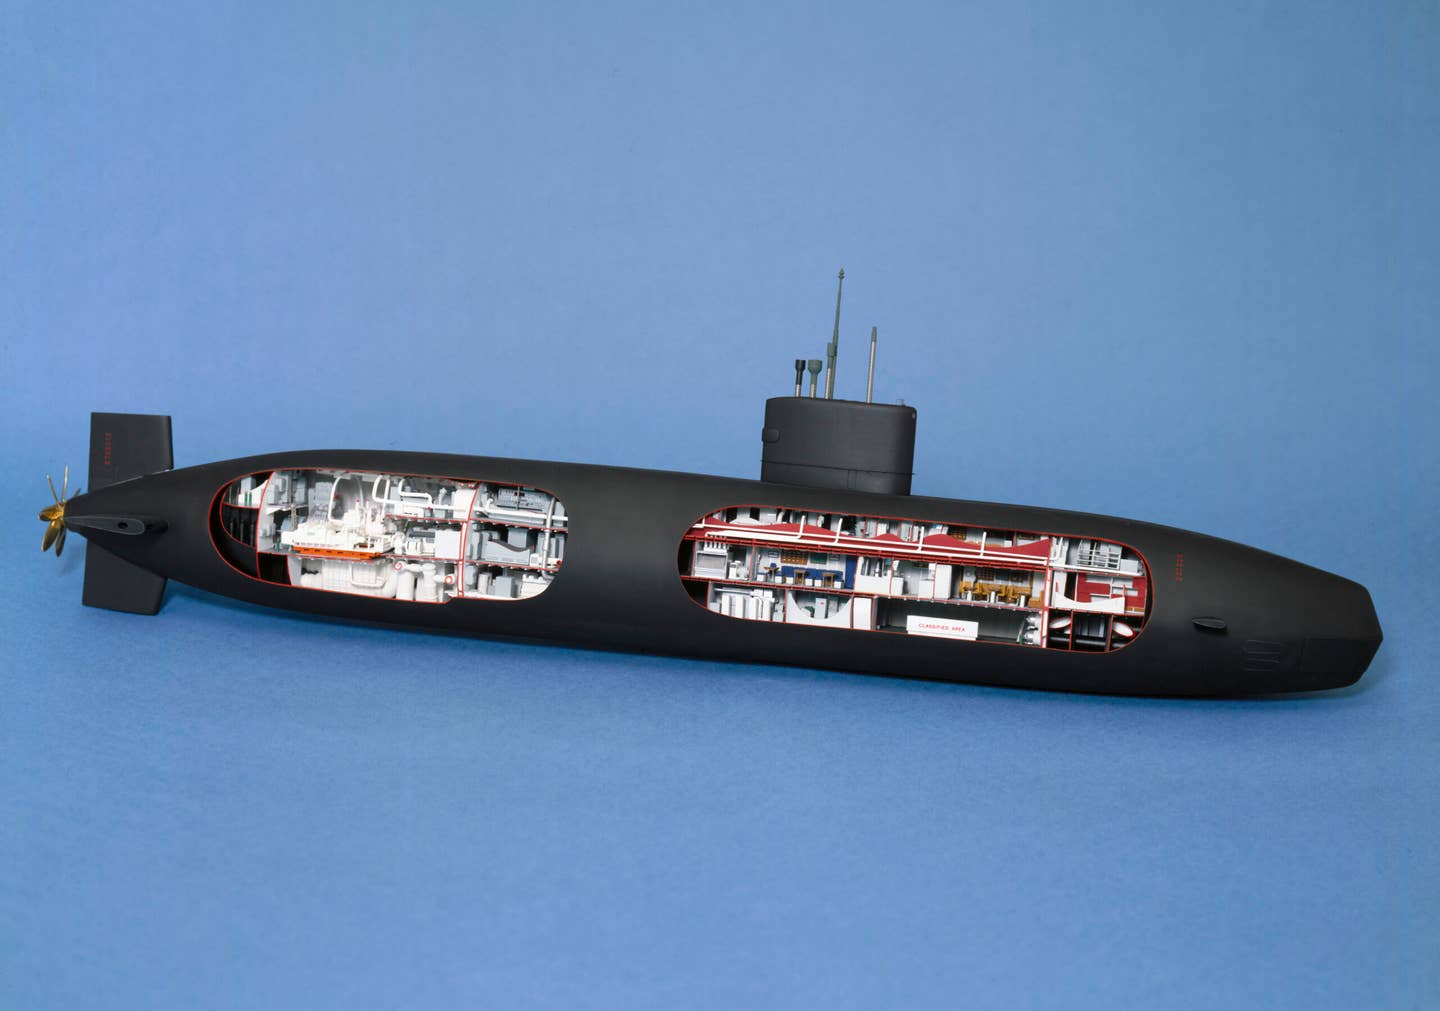 A partial cut-away model of the <em>Swiftsure</em> class nuclear-powered attack submarines. <em>Photo by SSPL/Getty Images</em>